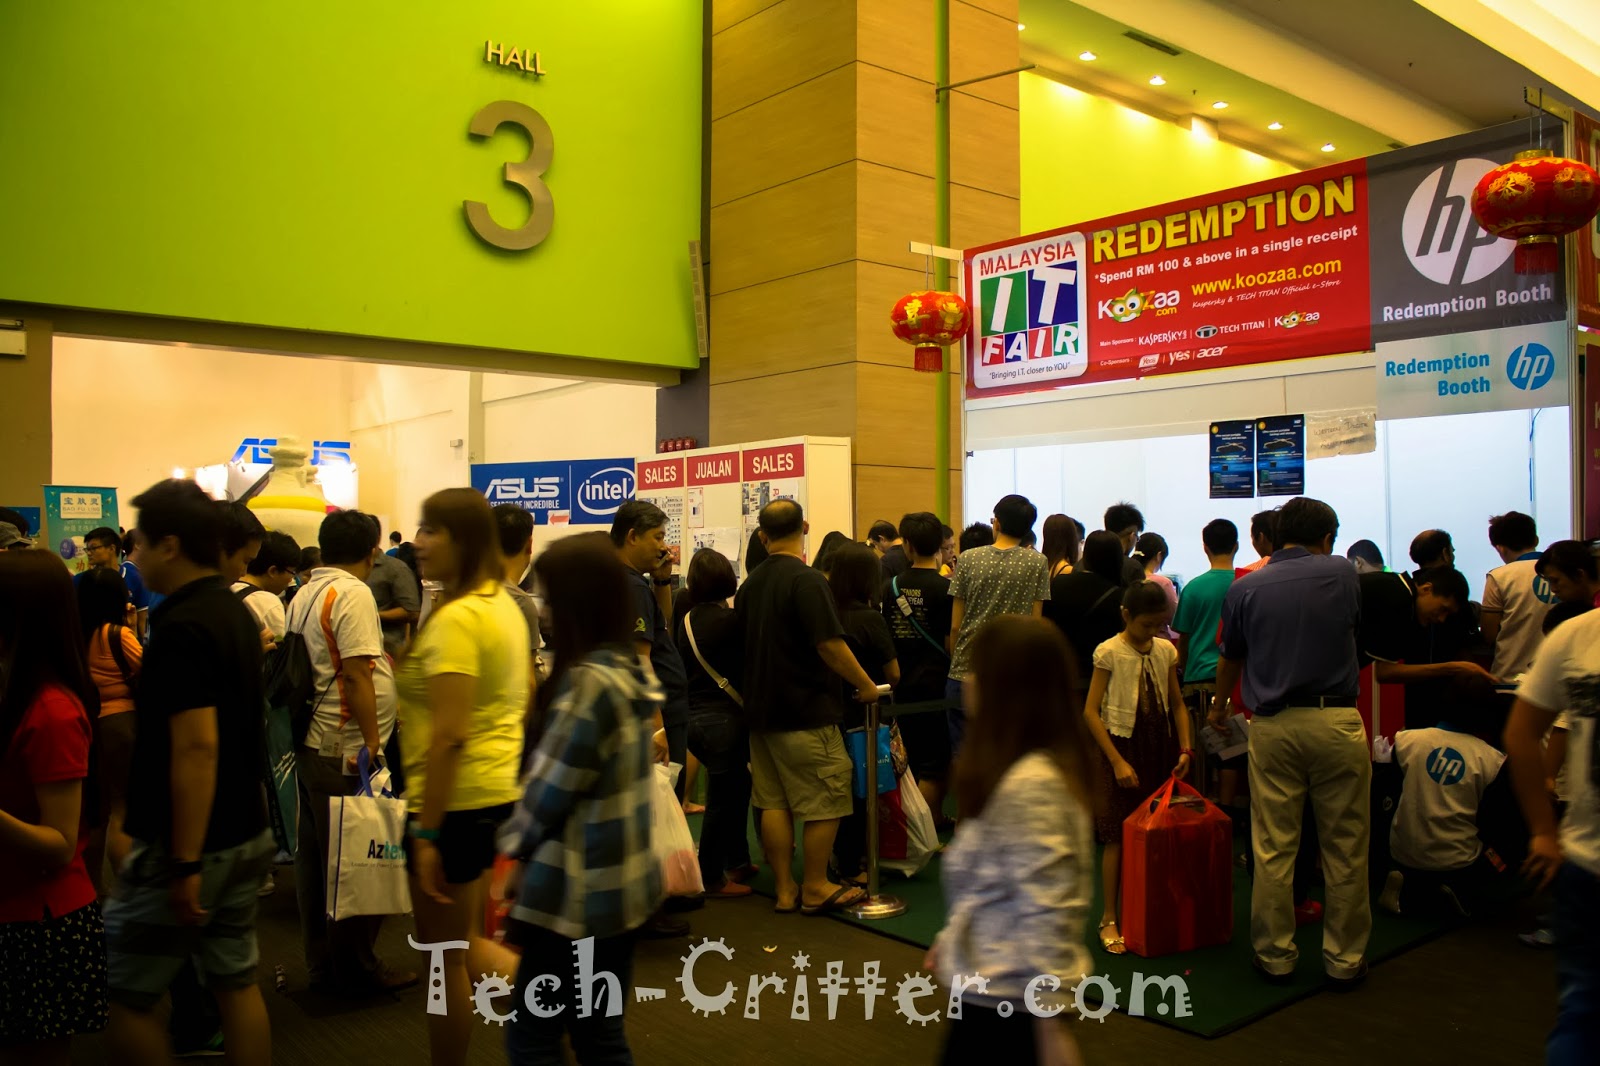 Coverage of the Malaysia IT Fair @ Mid Valley (17 - 19 Jan 2014) 226